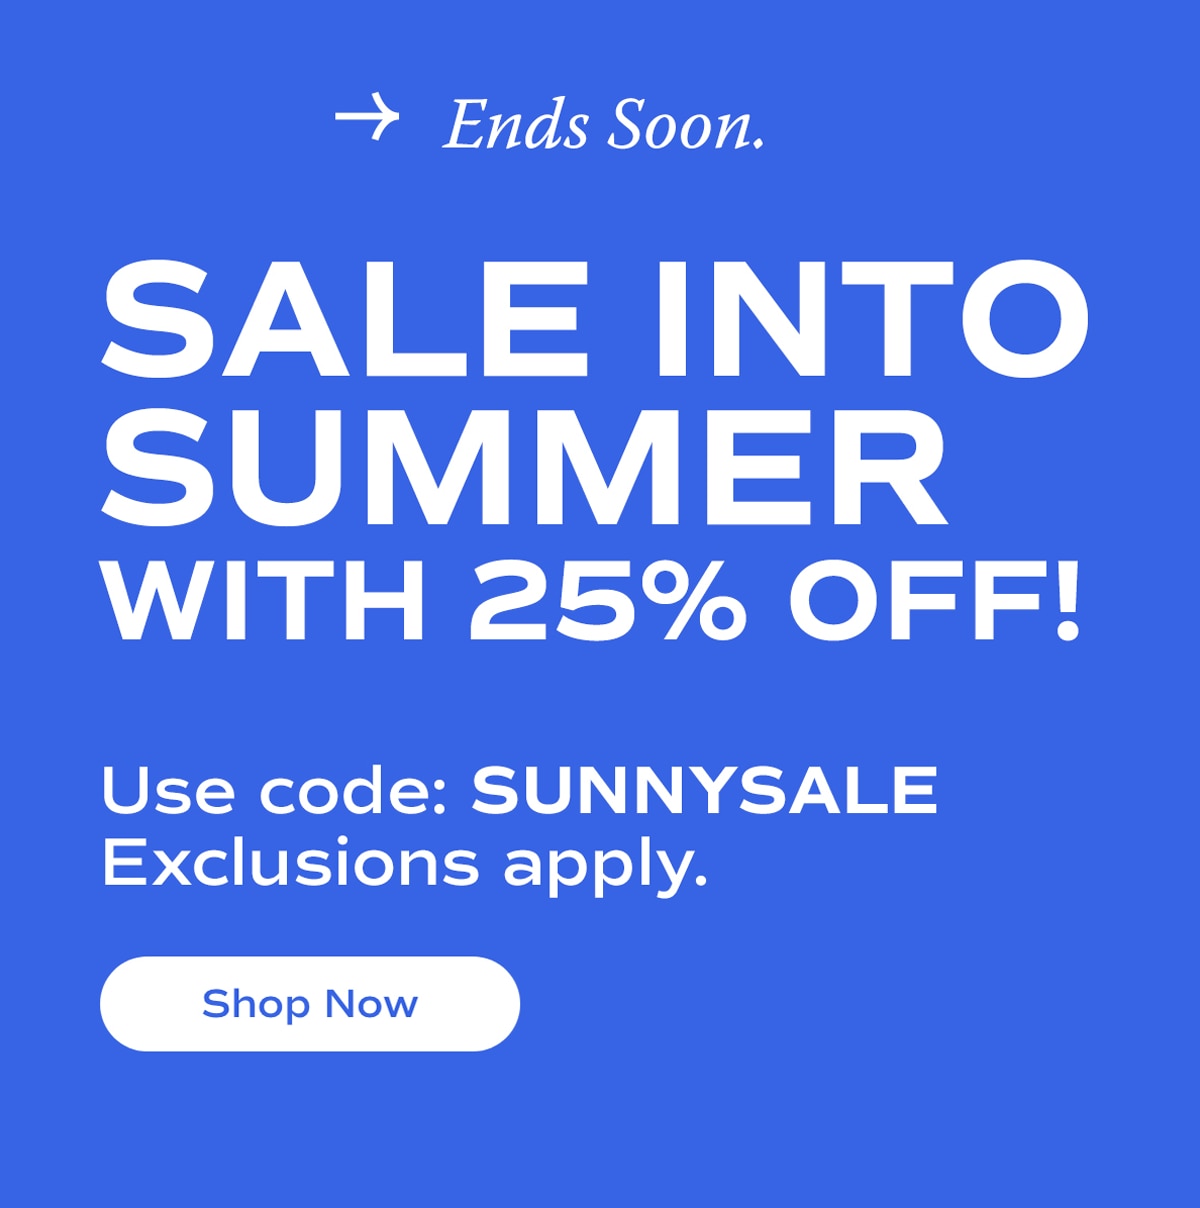 Ends Soon. | SALE INTO SUMMER WITH 25% OFF! | Use code: SUNNYSALE | Exclusions apply. | Shop Now